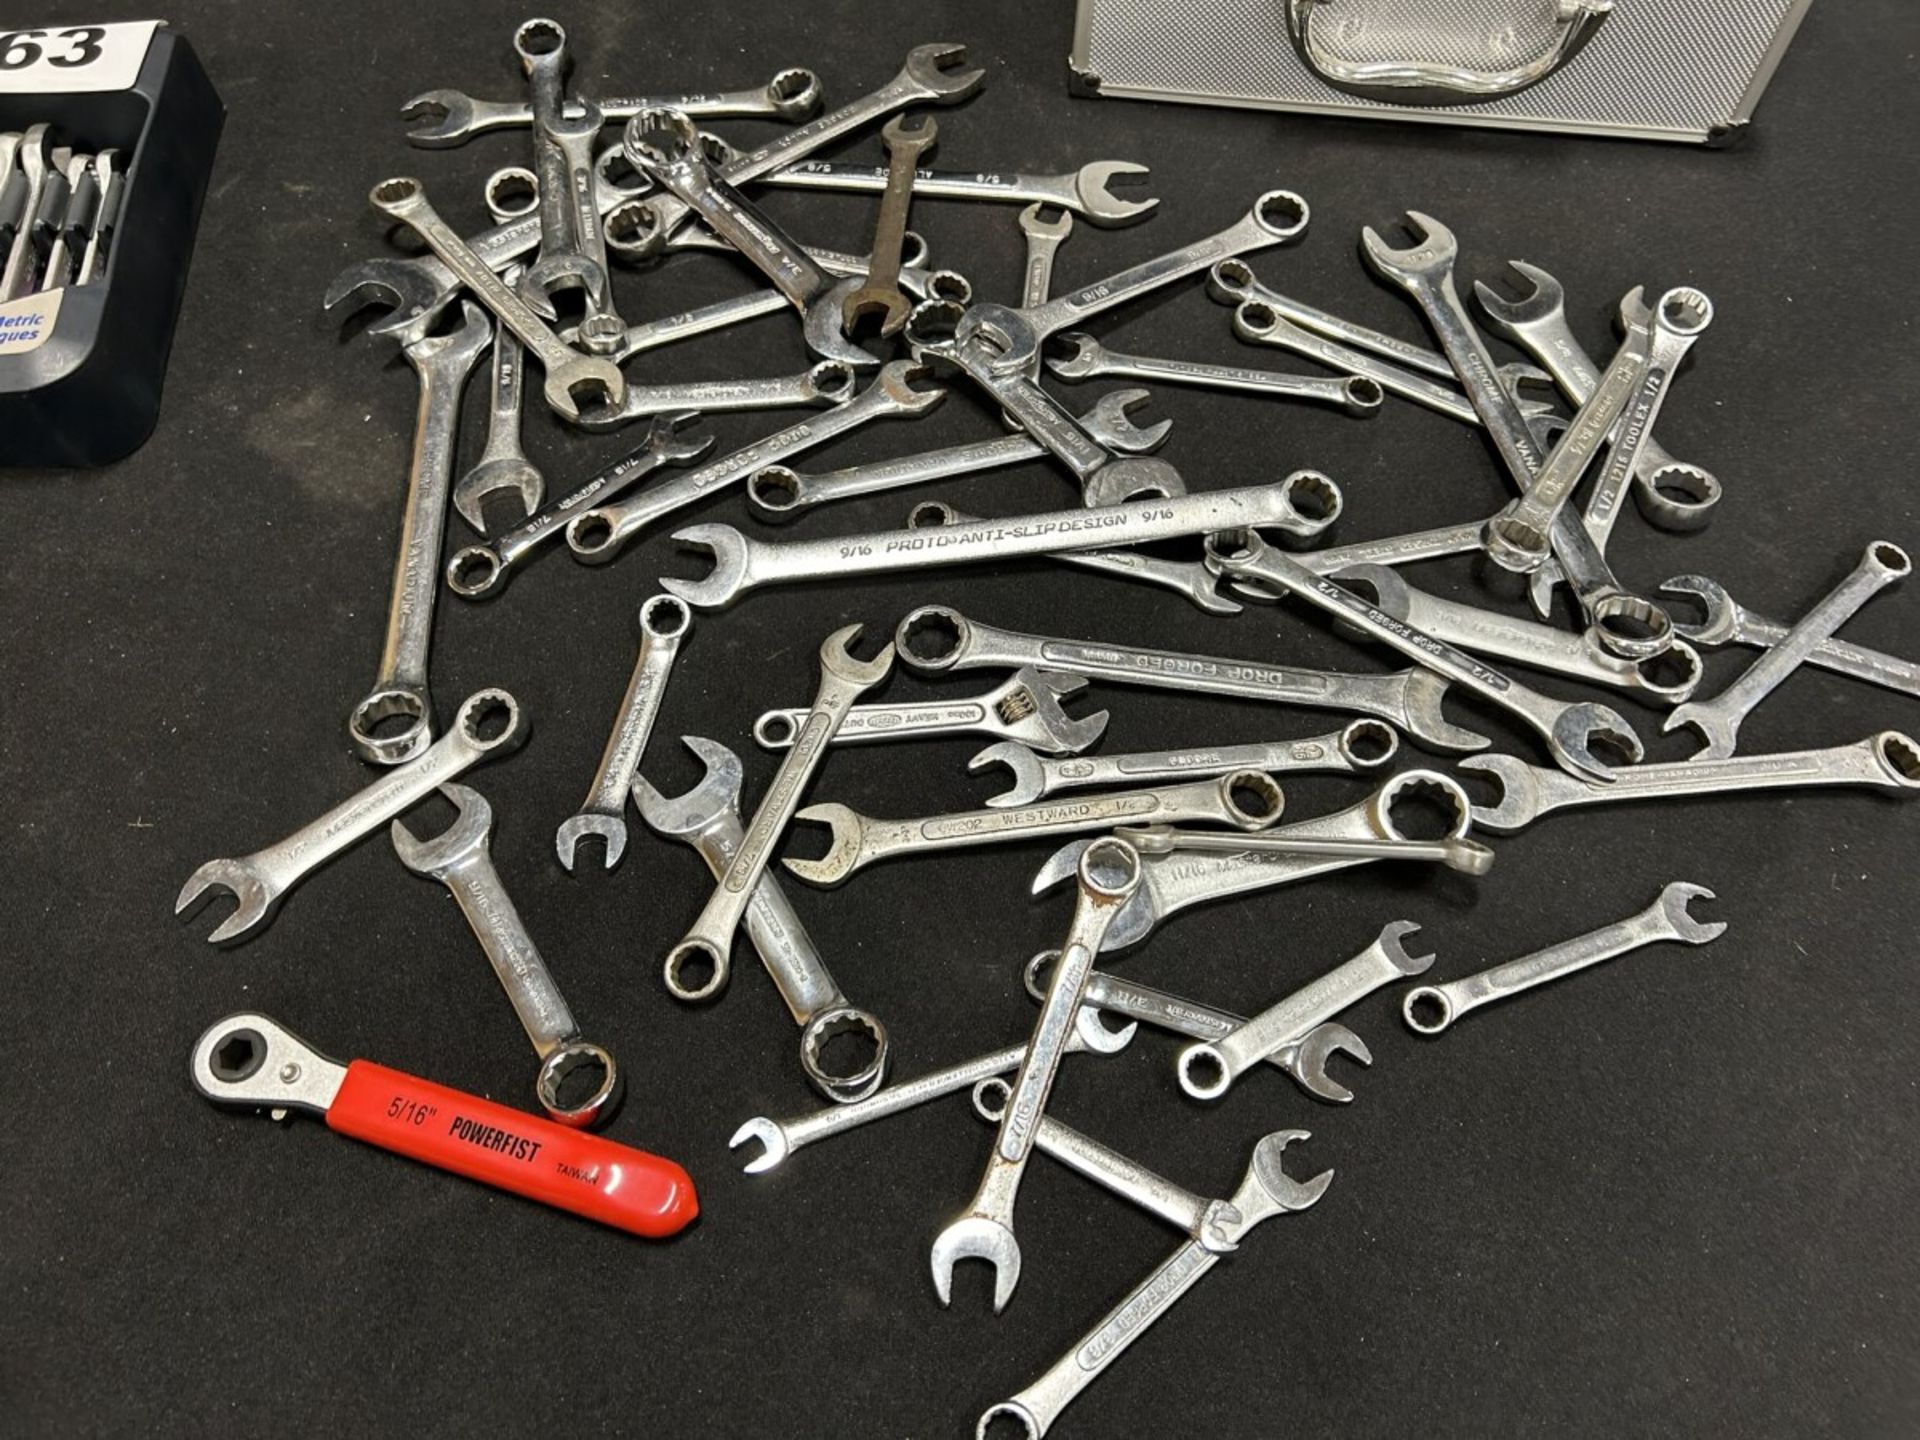 MASTERCRAFT STUBBY METRIC COMBINATION WRENCHES AND ASSORTED COMBINATION WRENCHES - Image 3 of 3